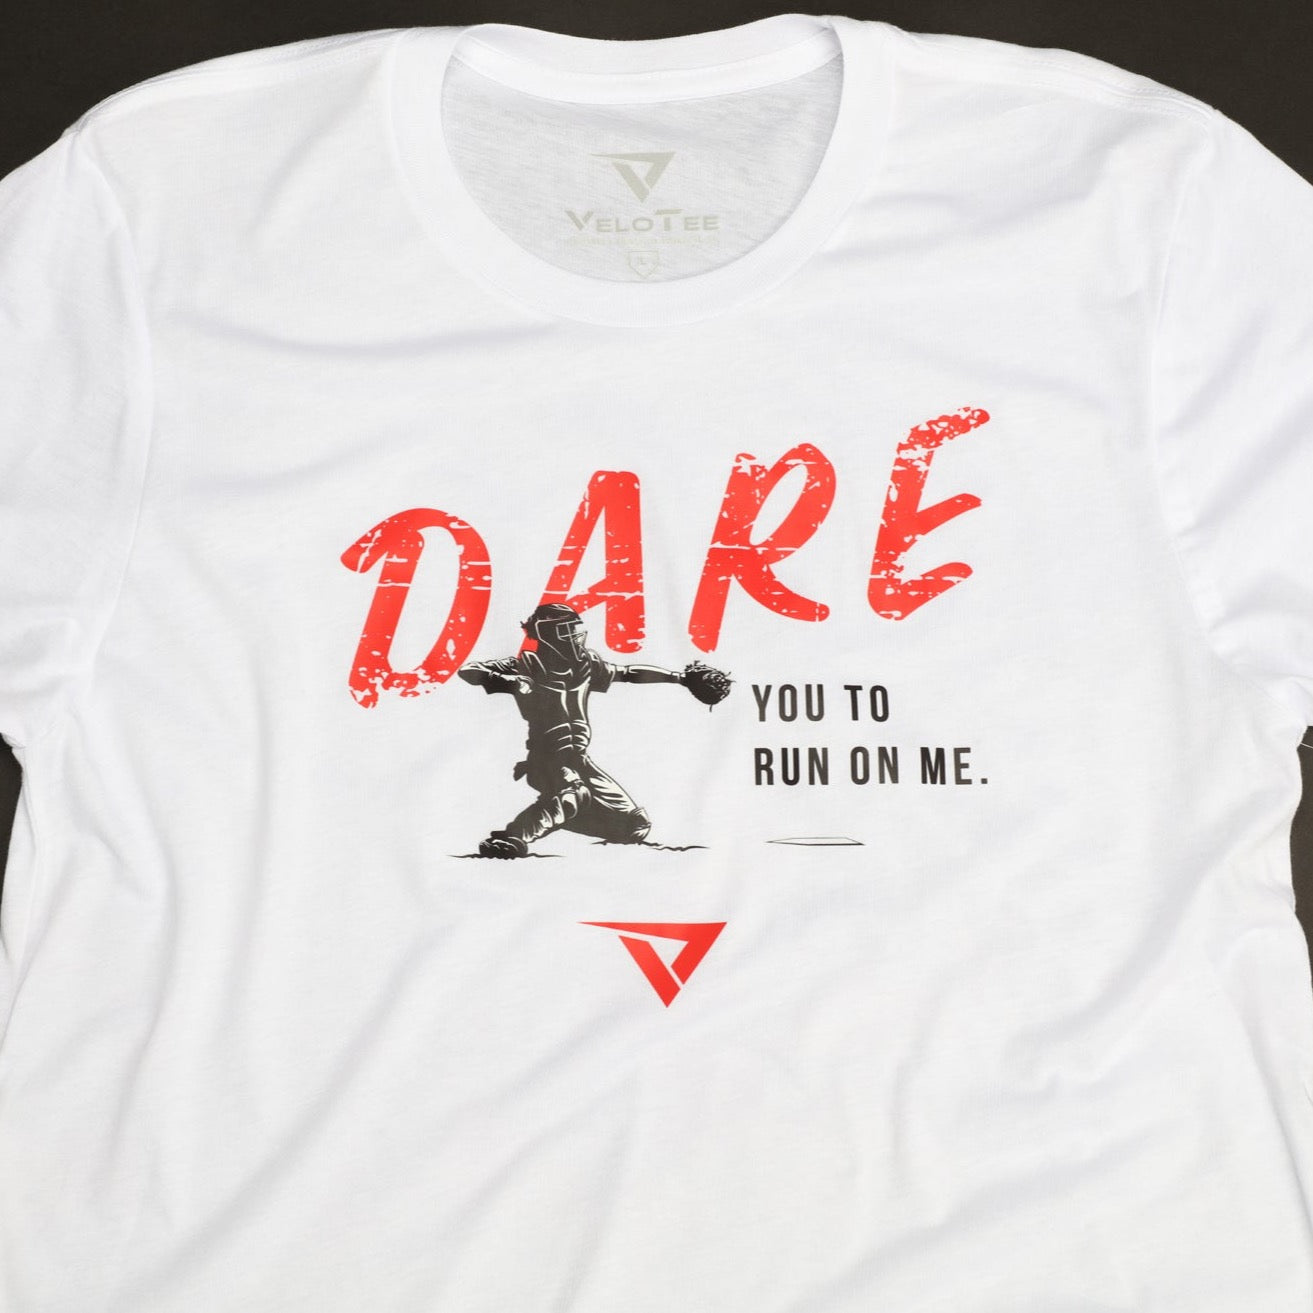 DARE You To Run On Me - VeloTee Catchers T-Shirt